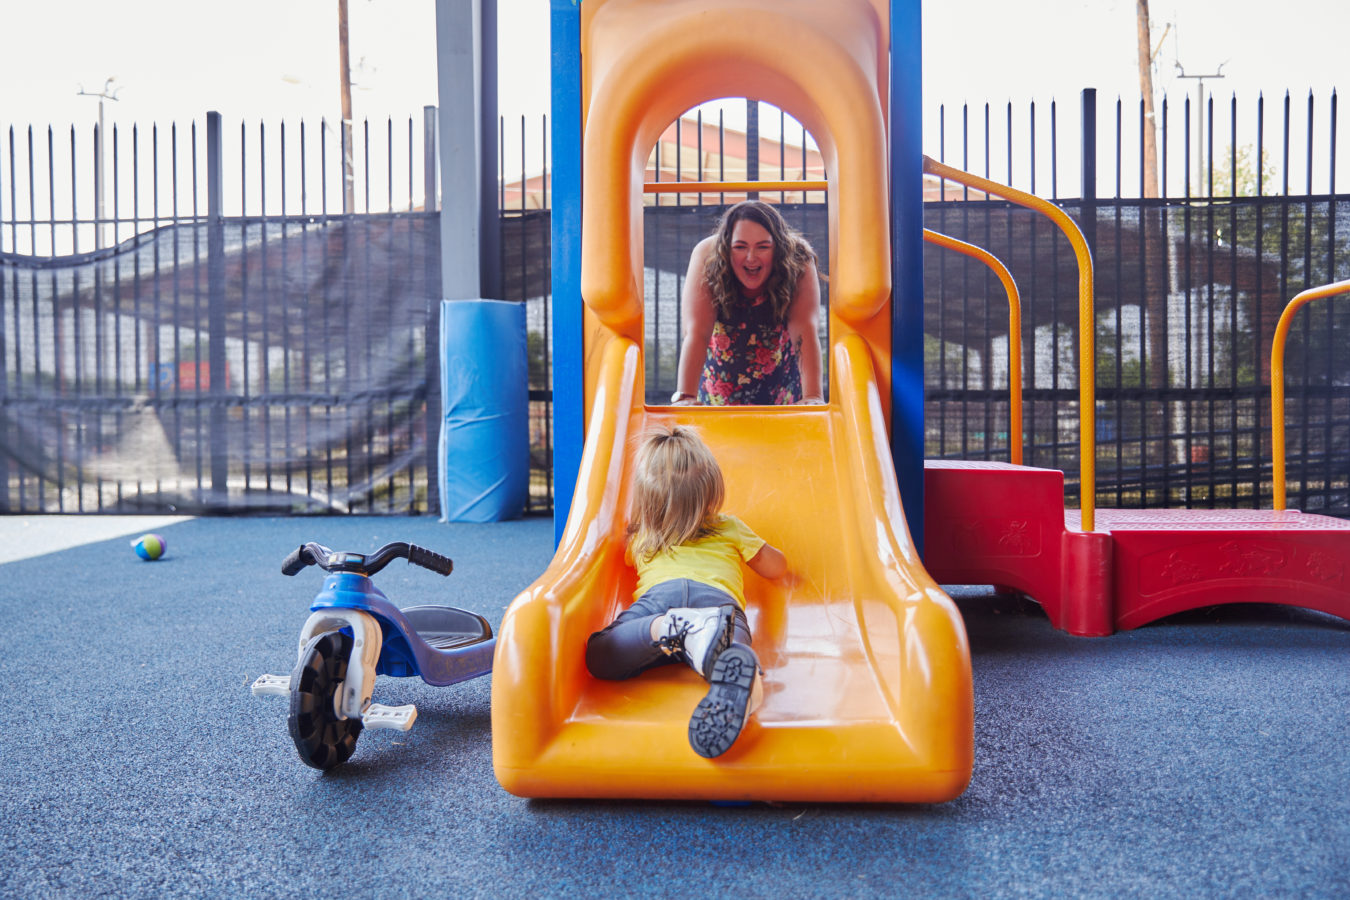 A child lays on a slide while looking up at an adult woman